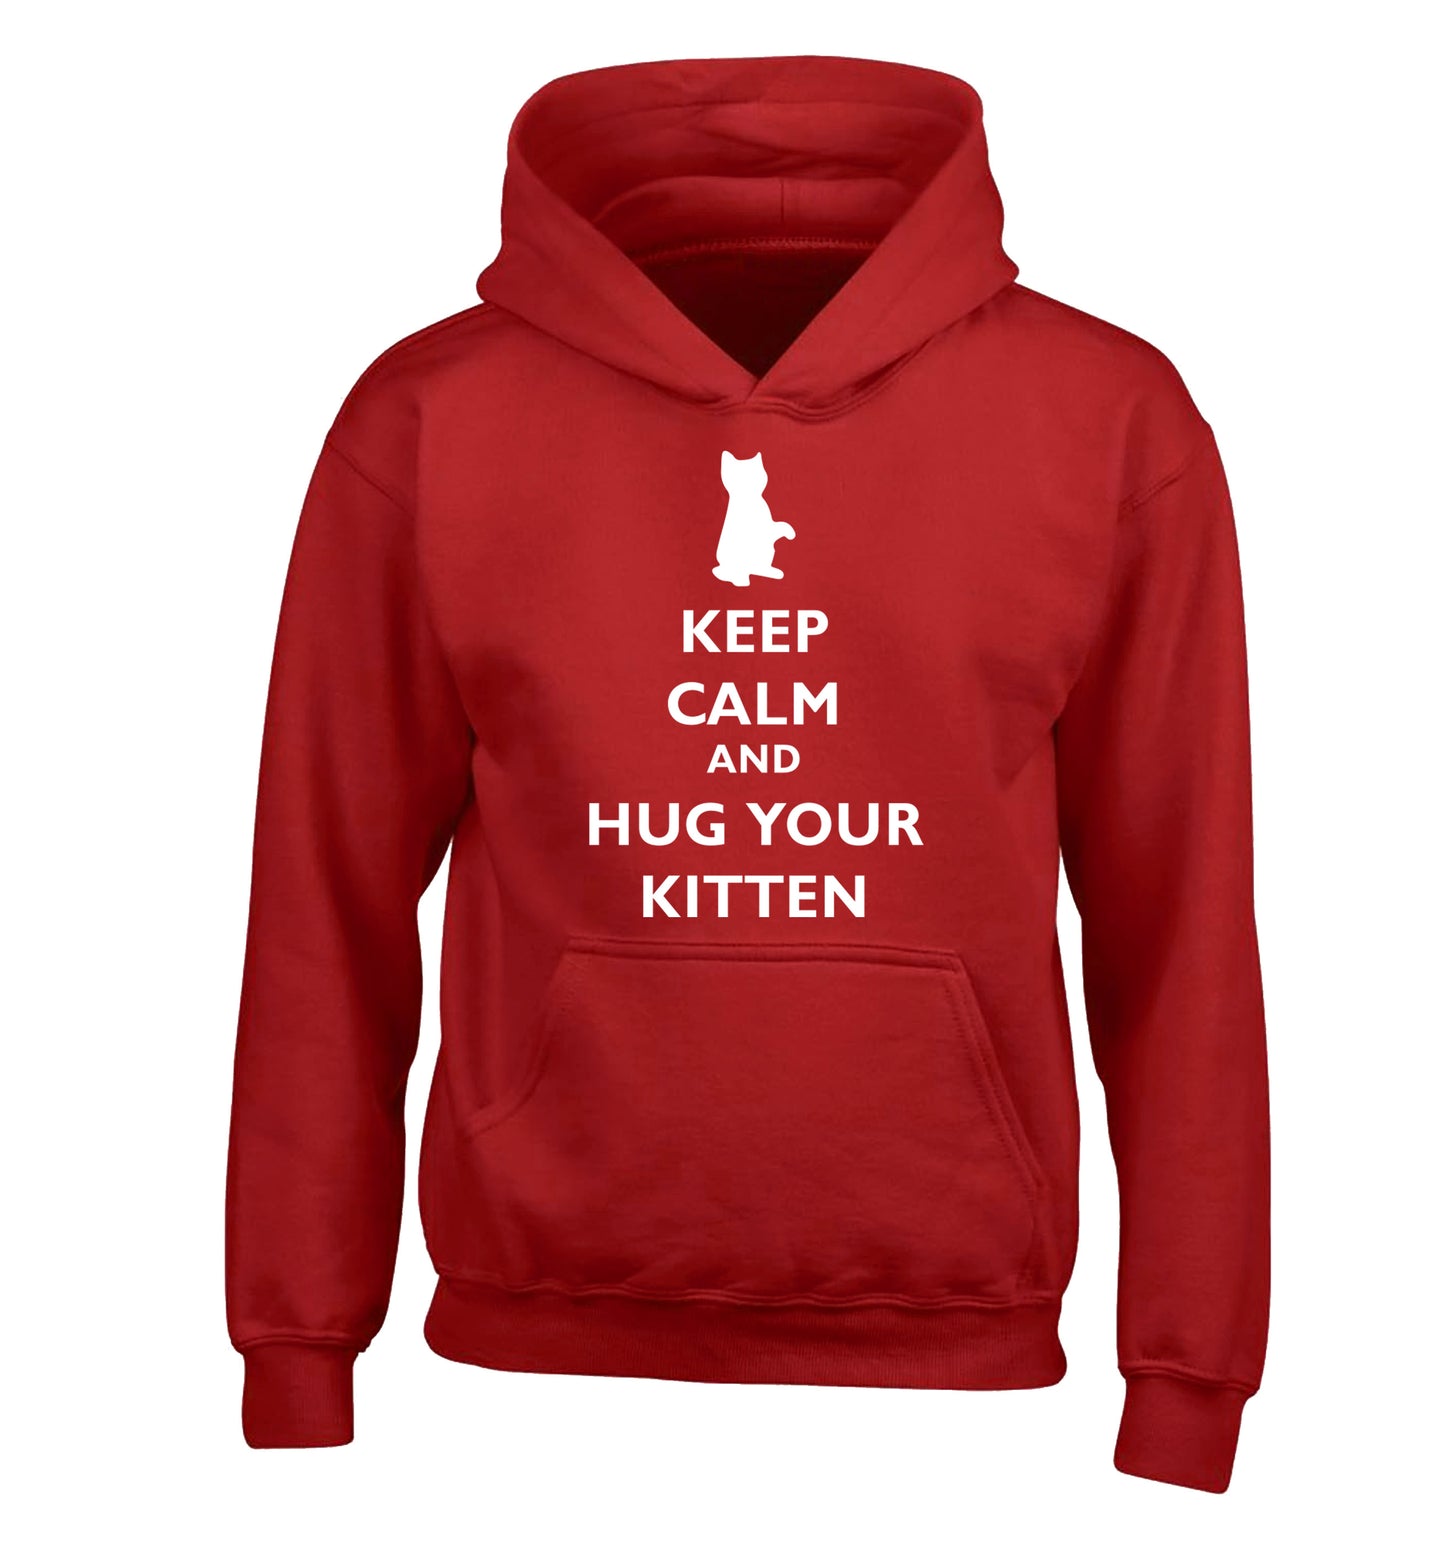 Keep calm and hug your kitten children's red hoodie 12-13 Years